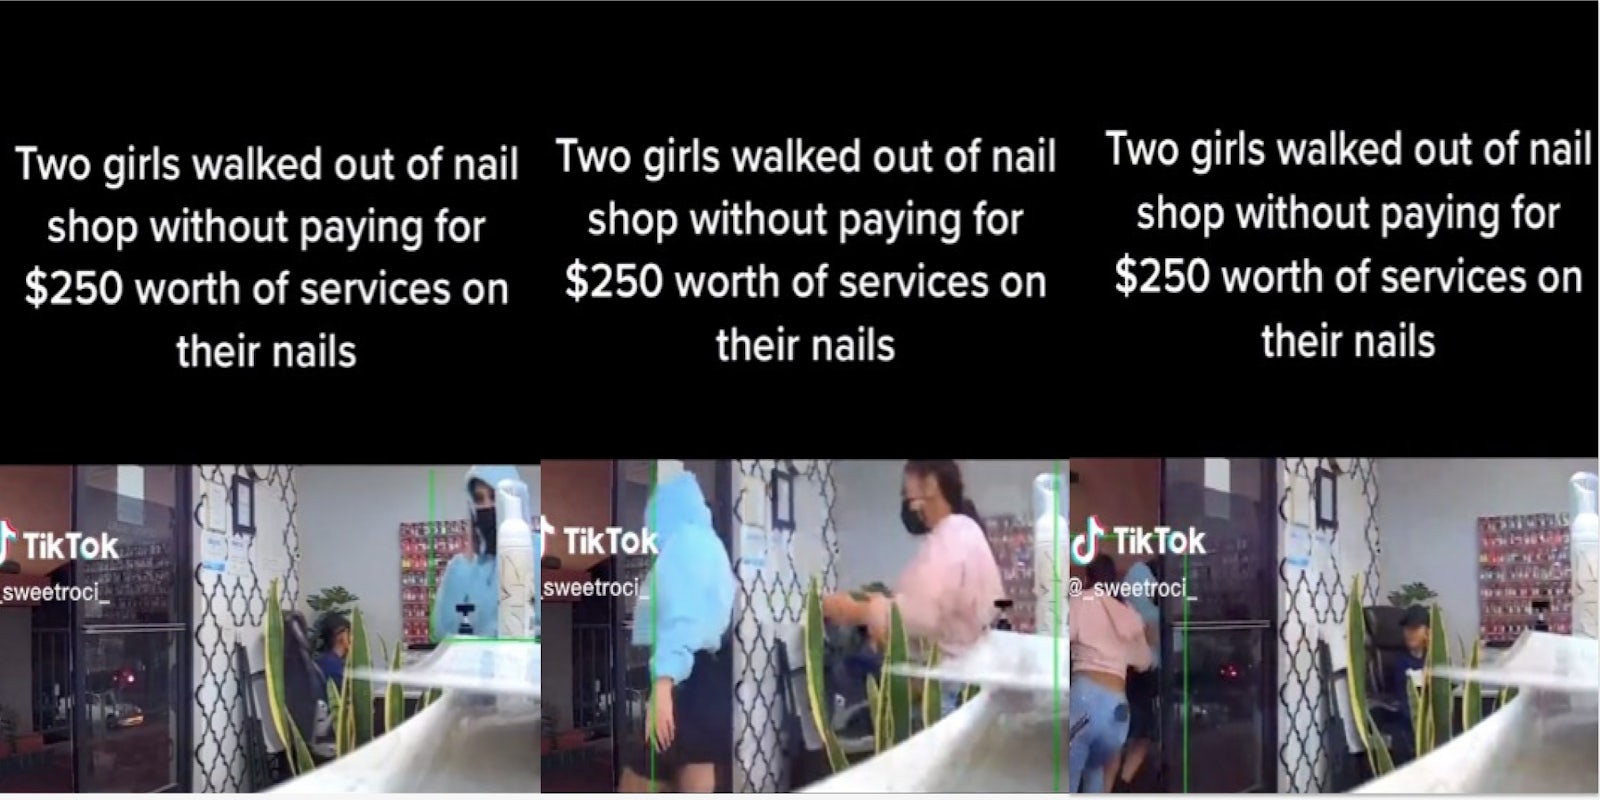 women running out of salon without paying tiktok caption 'Two girls walked out of nail shop without paying for $250 worth of services on their nails (l) women running out of salon without paying tiktok caption 'Two girls walked out of nail shop without paying for $250 worth of services on their nails (c)women running out of salon without paying tiktok caption 'Two girls walked out of nail shop without paying for $250 worth of services on their nails (r)